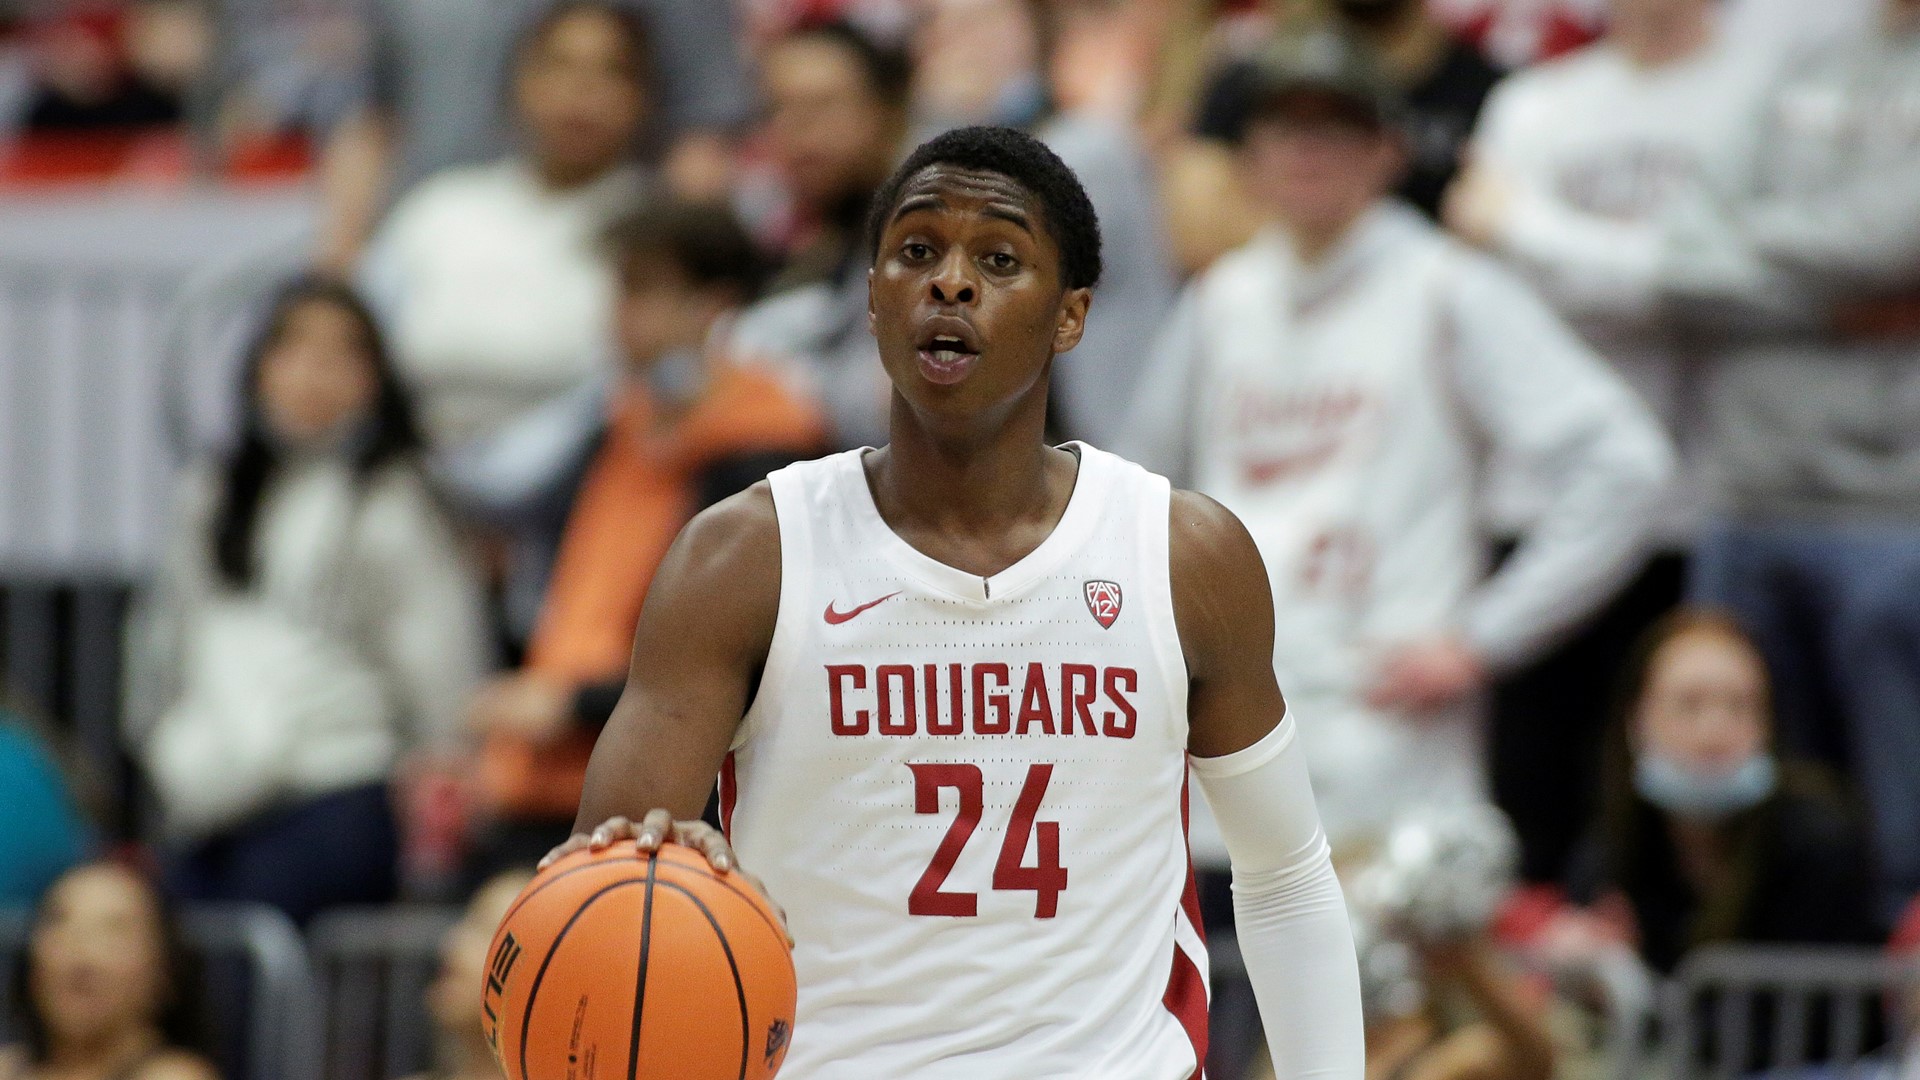 Former Washington State guard Noah Williams has committed to play at the University of Washington.